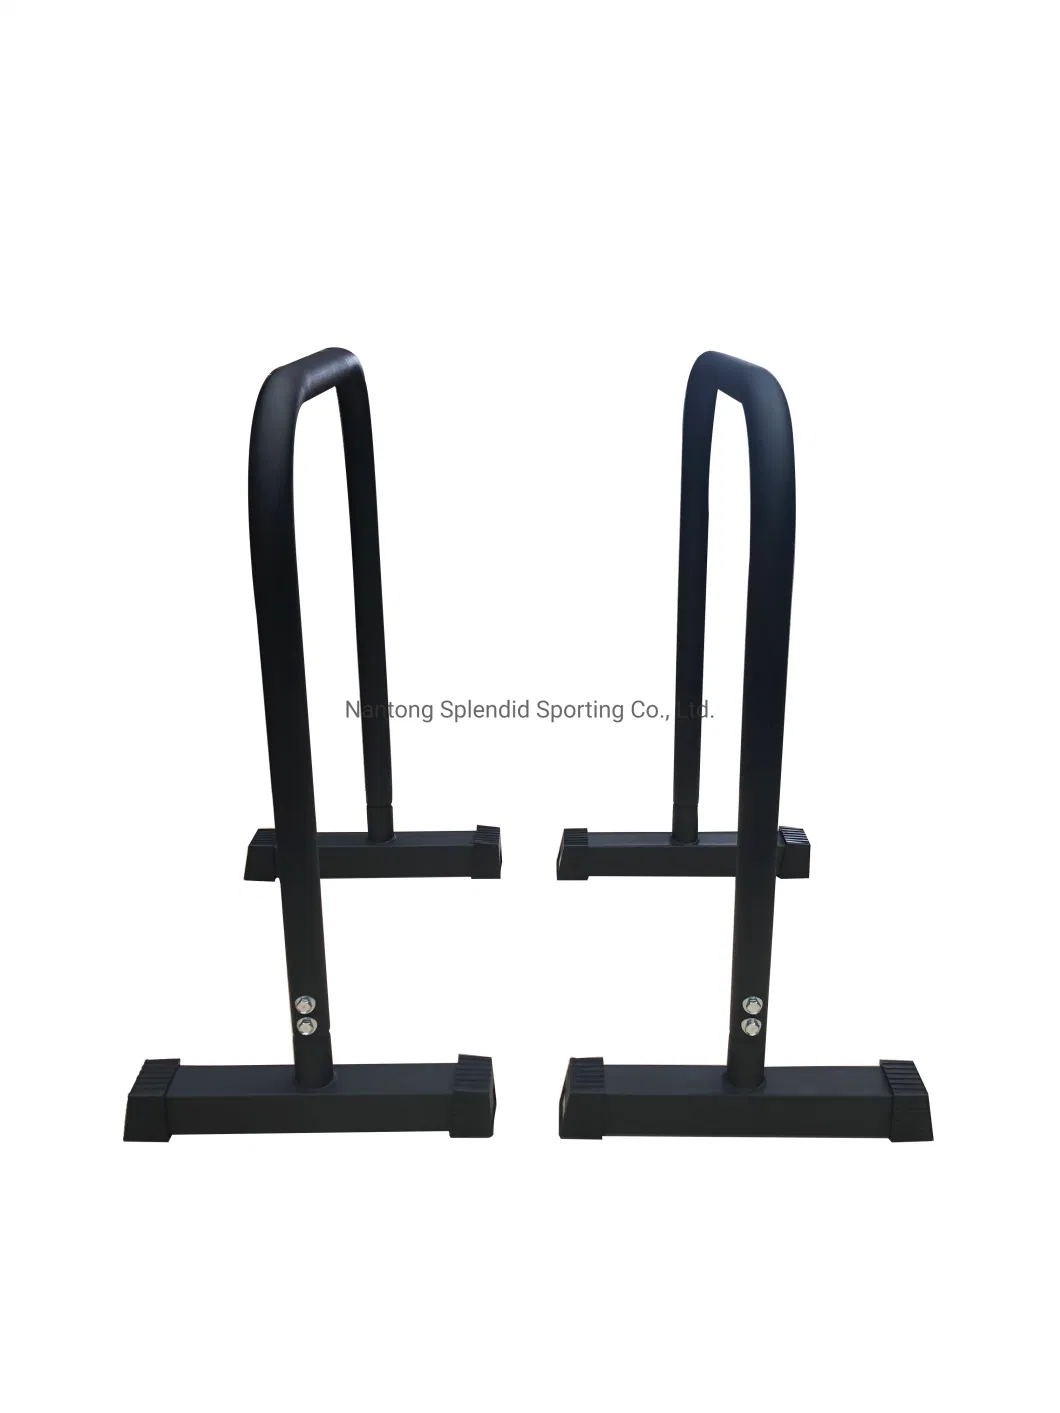 Equalizer Handstand Parallettes Bar Non-Slip Push up Stand Home Parallel DIP Stands Station